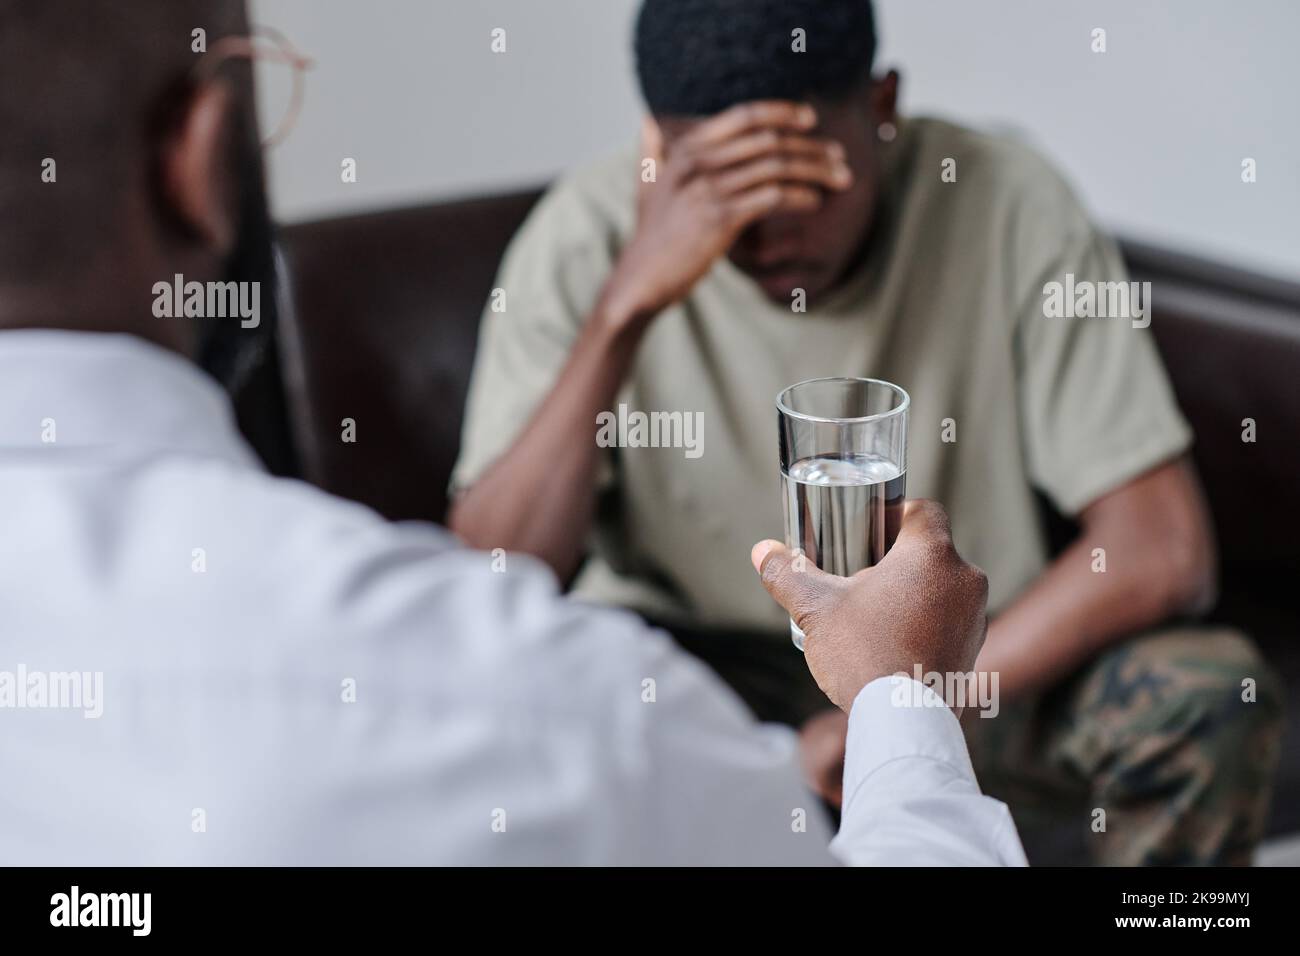 Rear view of psychologist giving glass of water to patient and supporting him during session Stock Photo